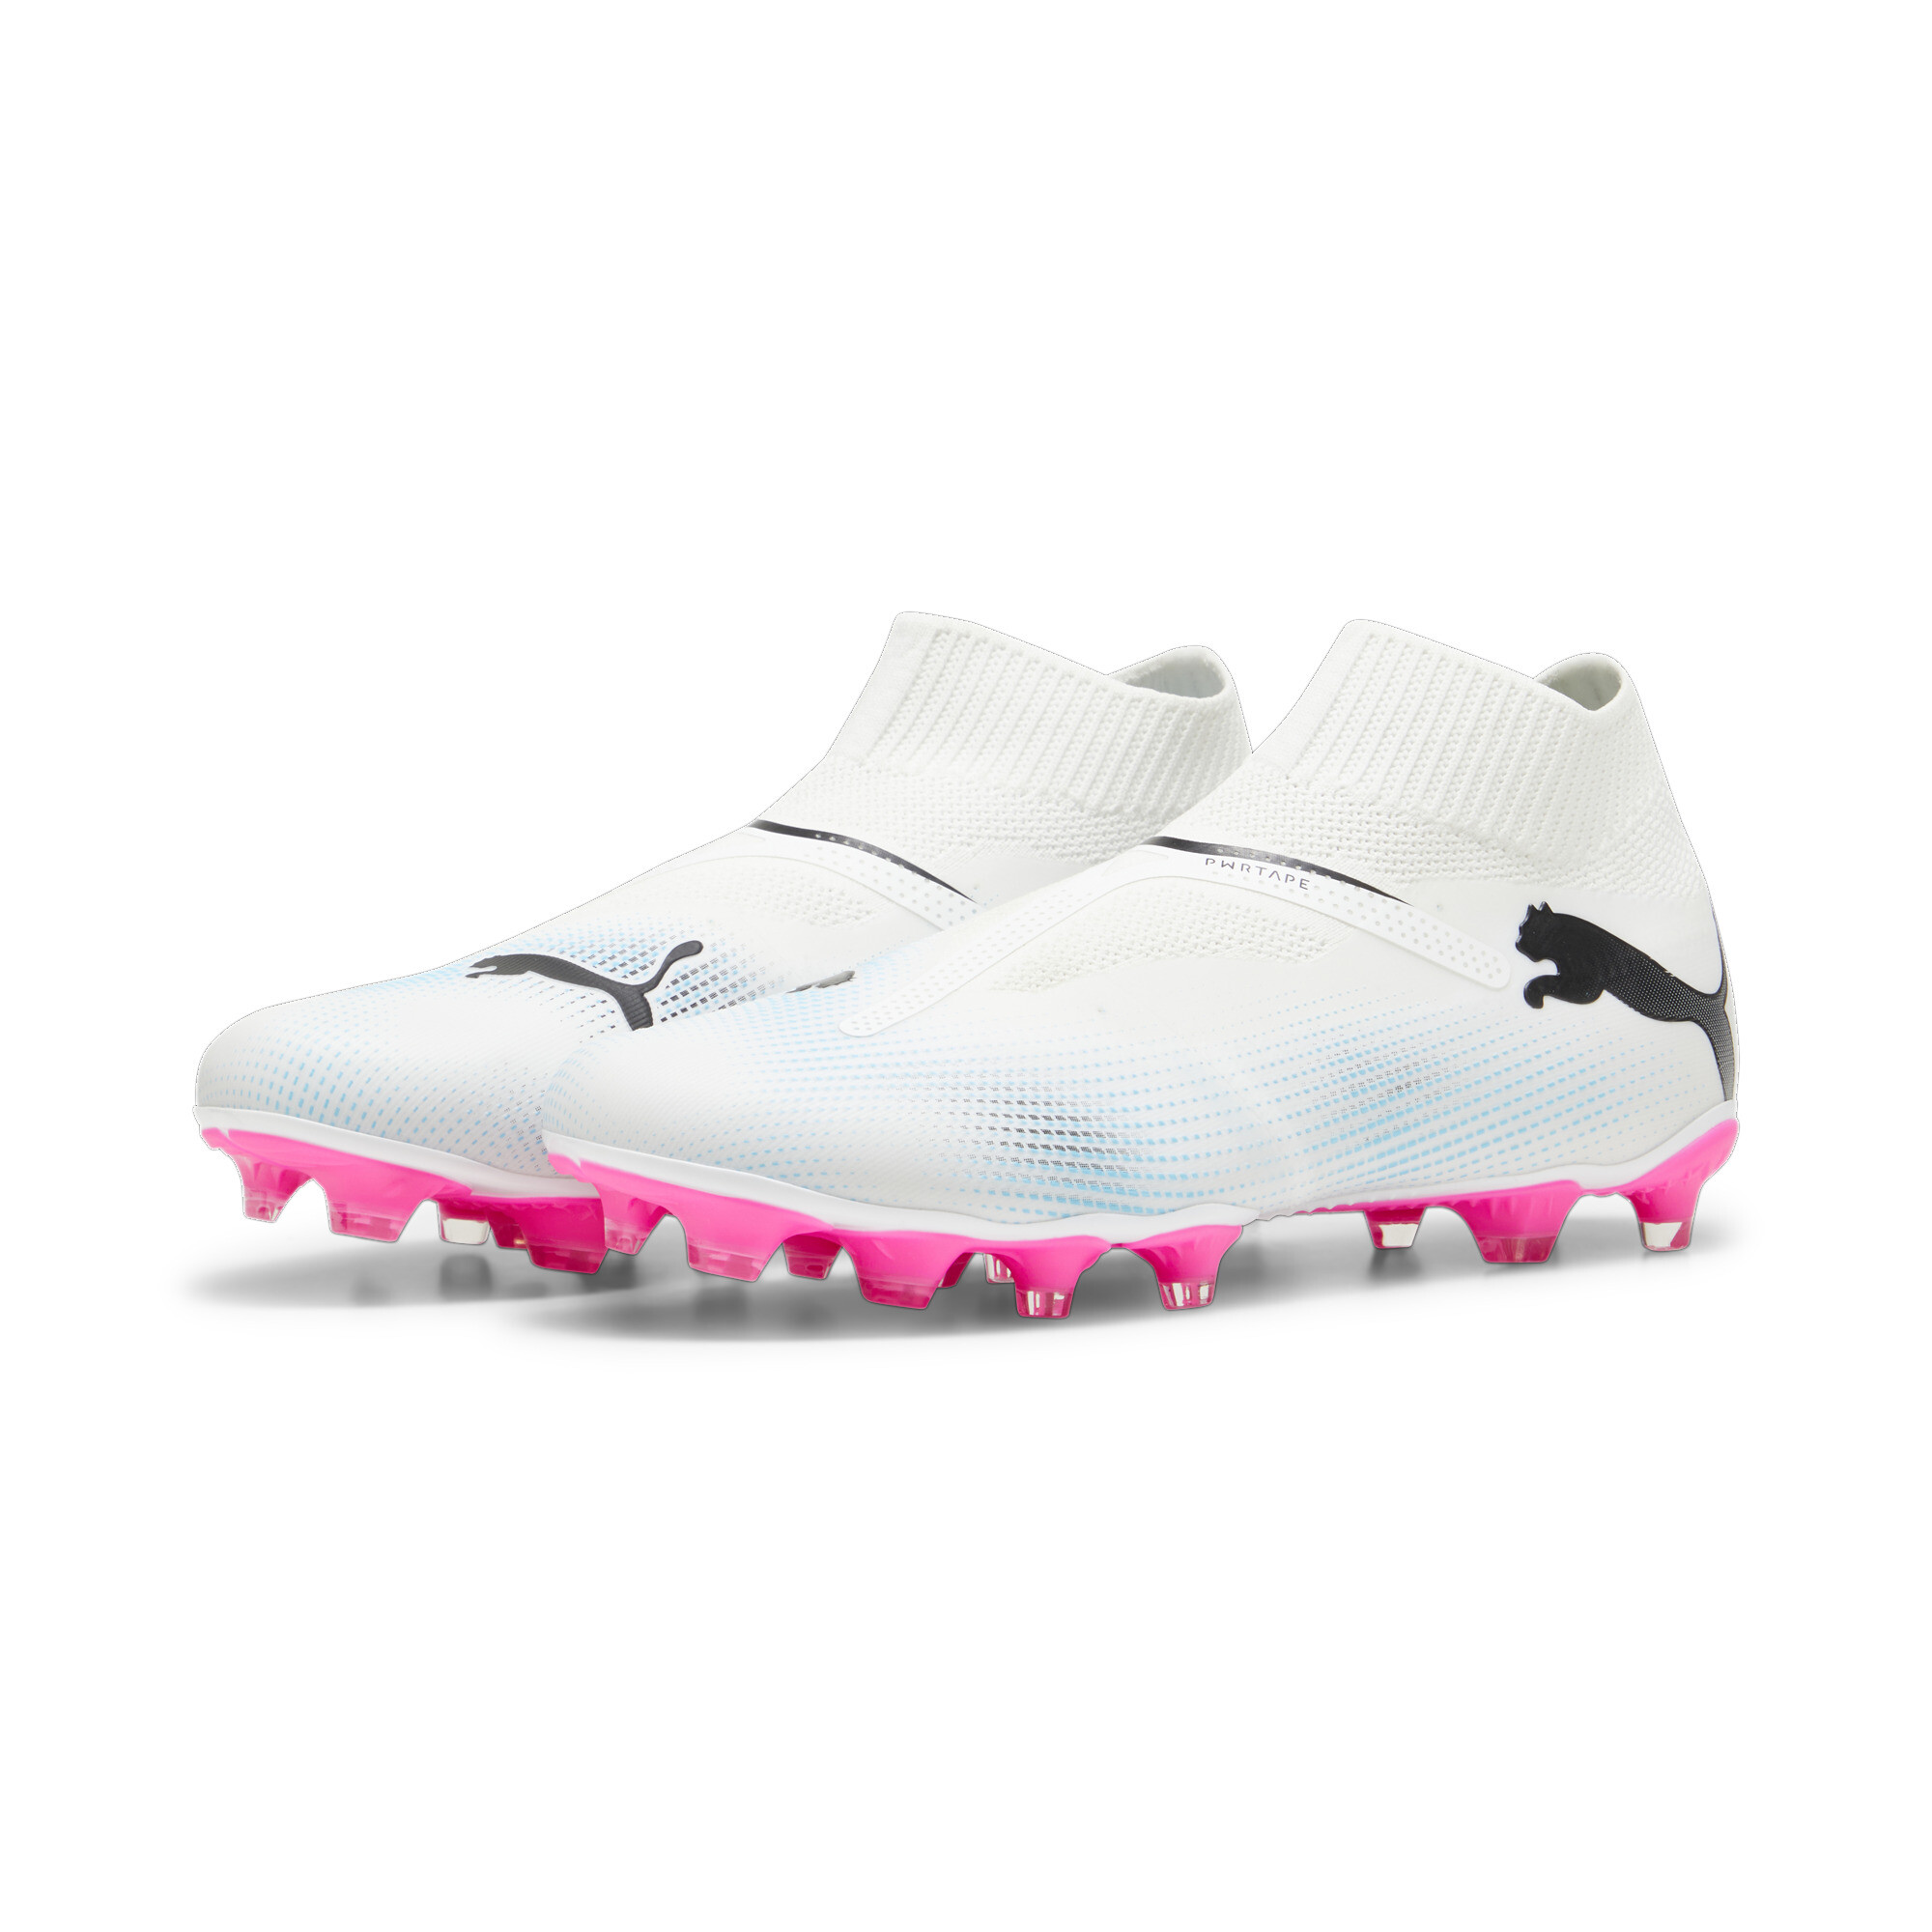 Men's PUMA FUTURE 7 MATCH FG/AG Laceless Football Boots In White/Pink, Size EU 44